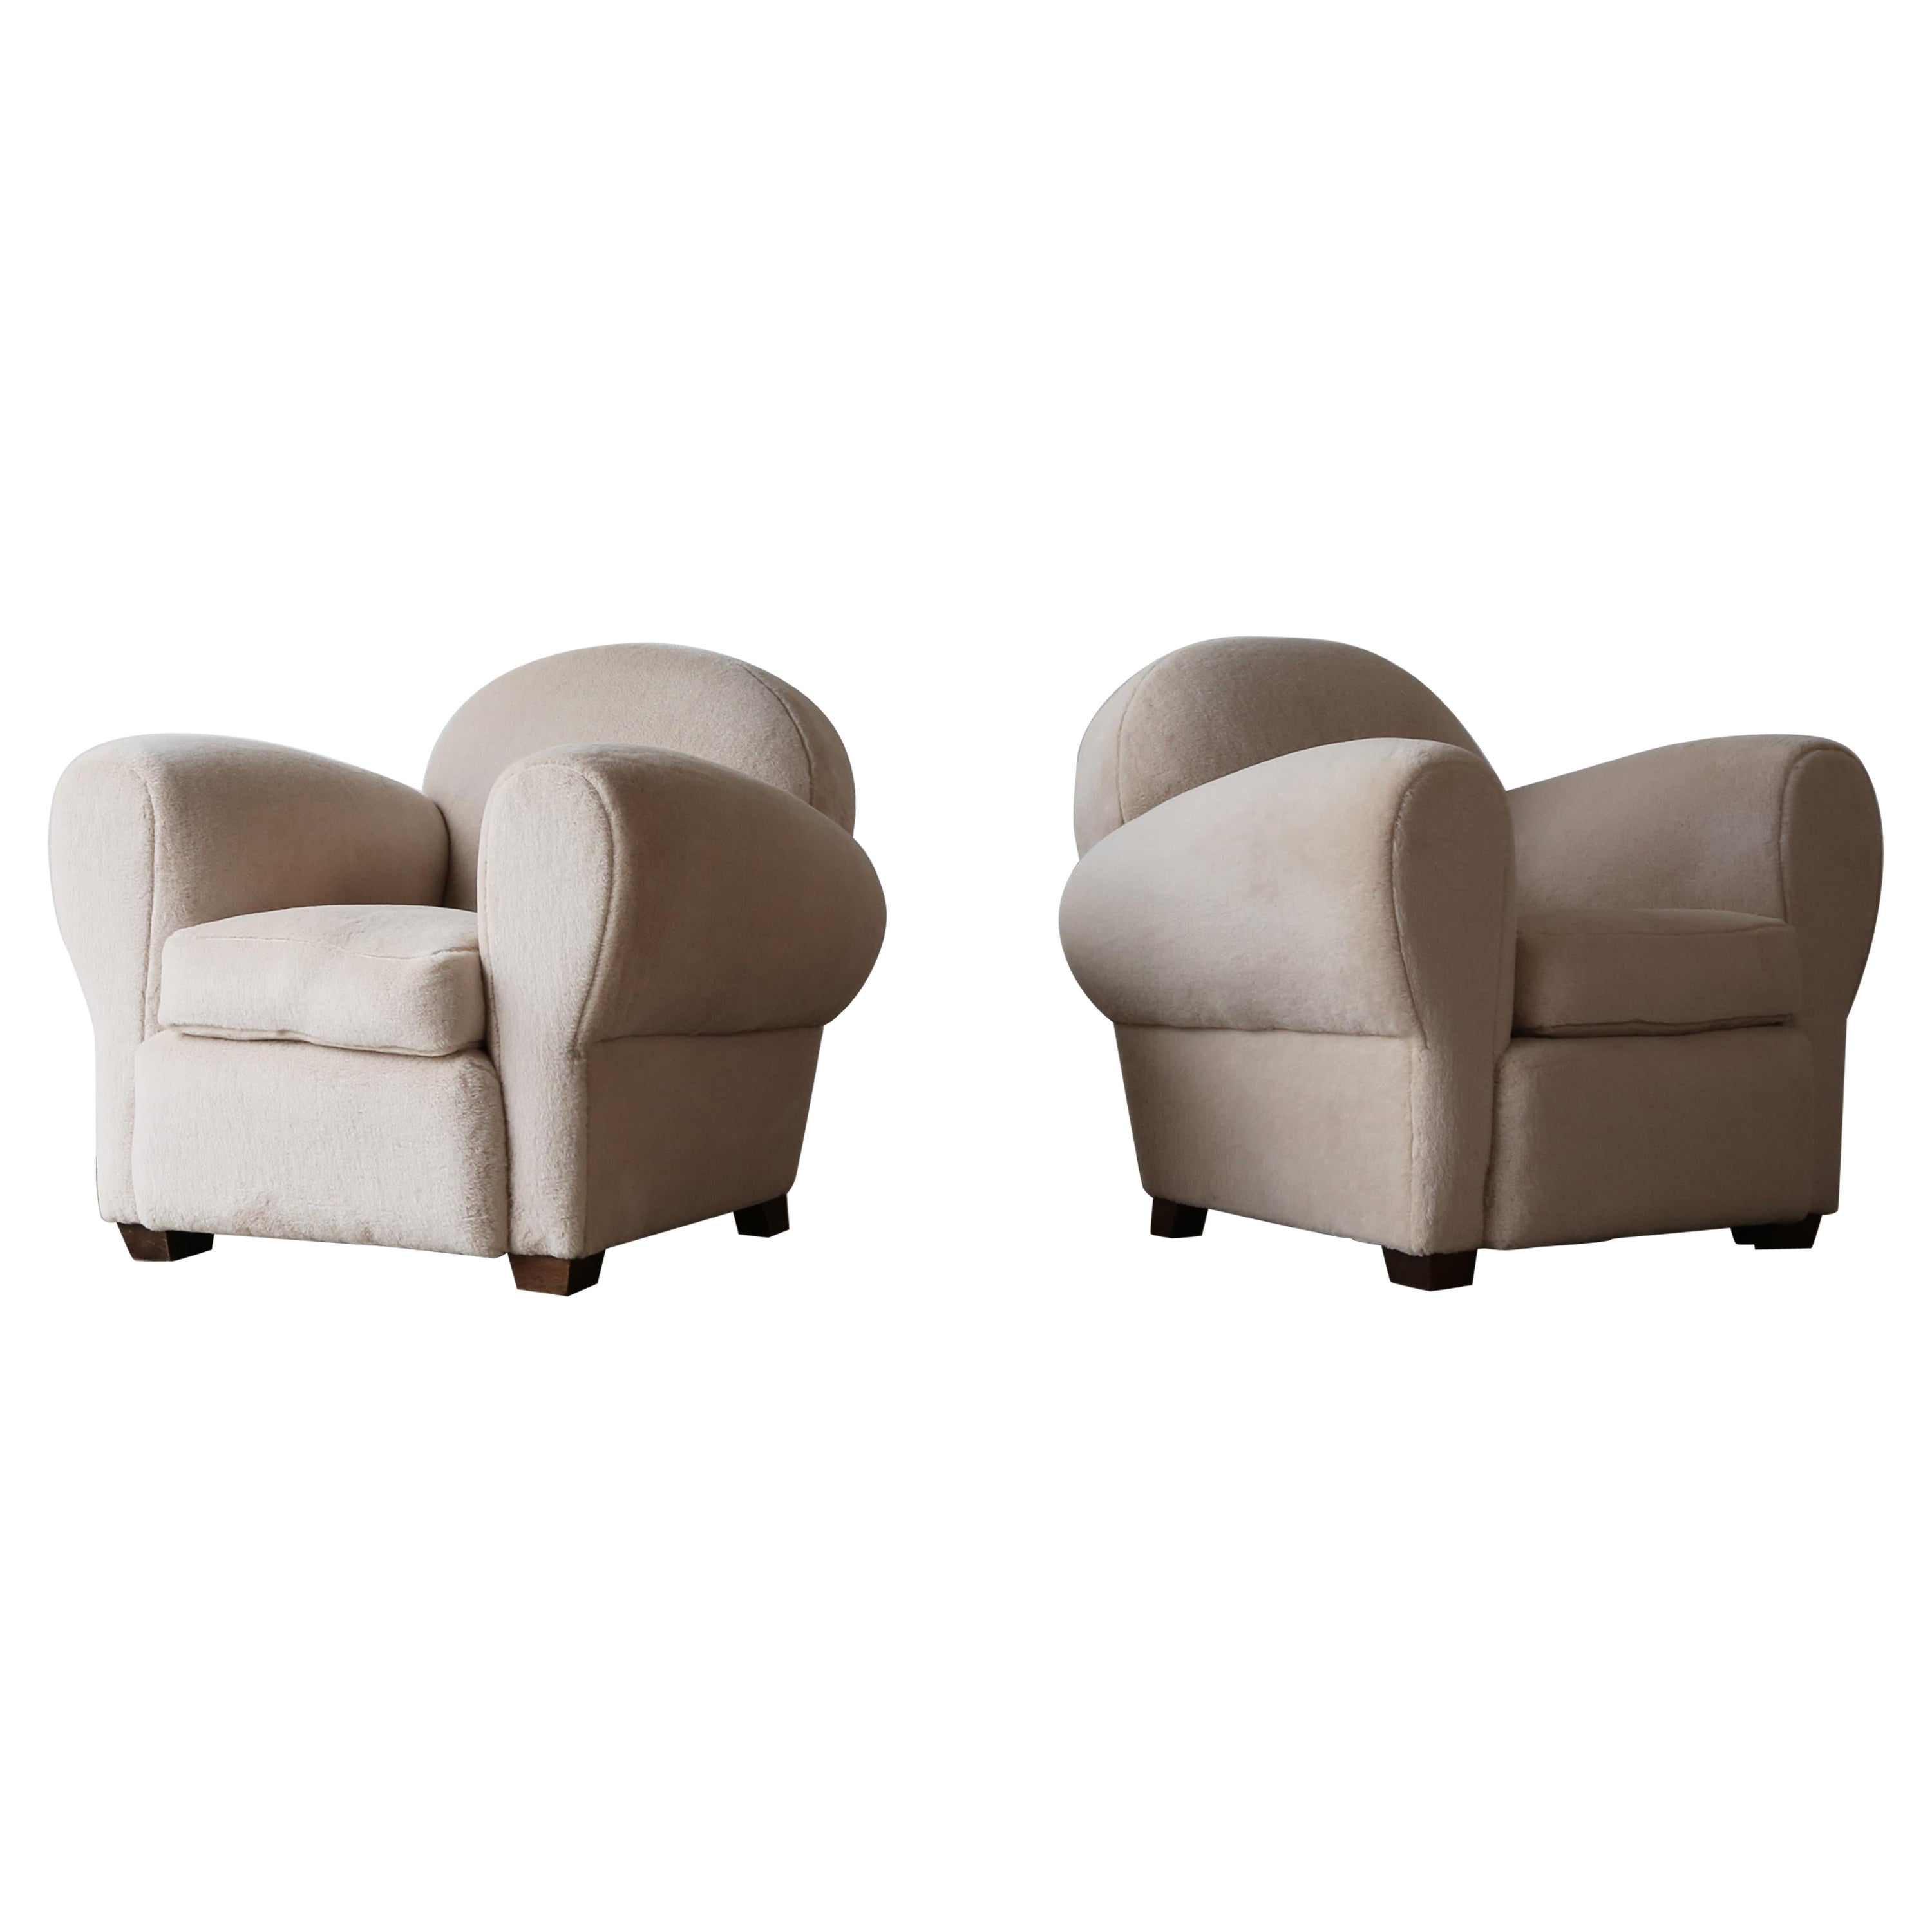 Pair of Club Chairs from Château de Sancerre, France, 1940s For Sale